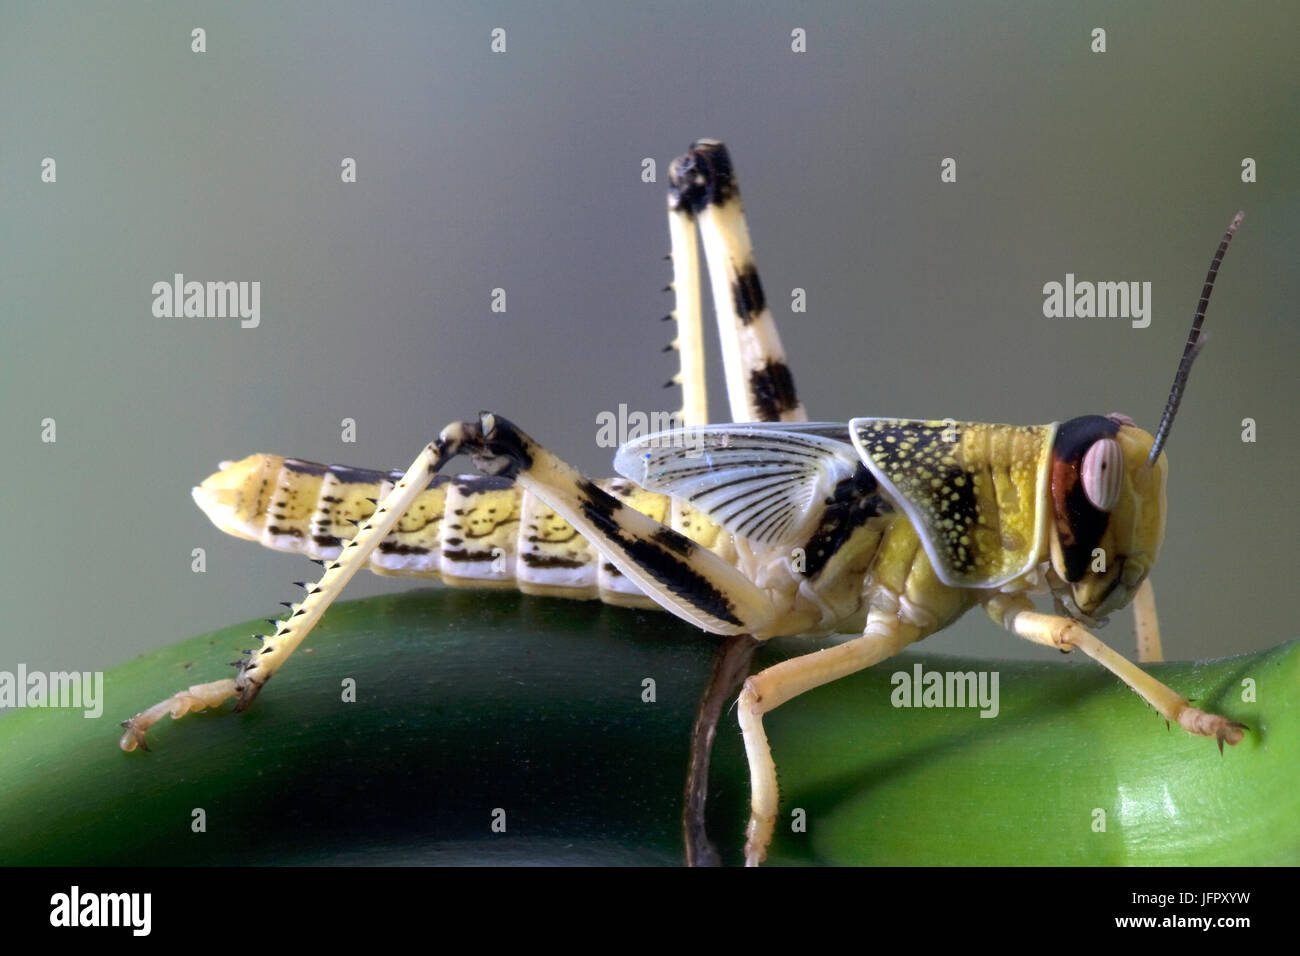 Close Up of a Locust on Plant Stock Photo